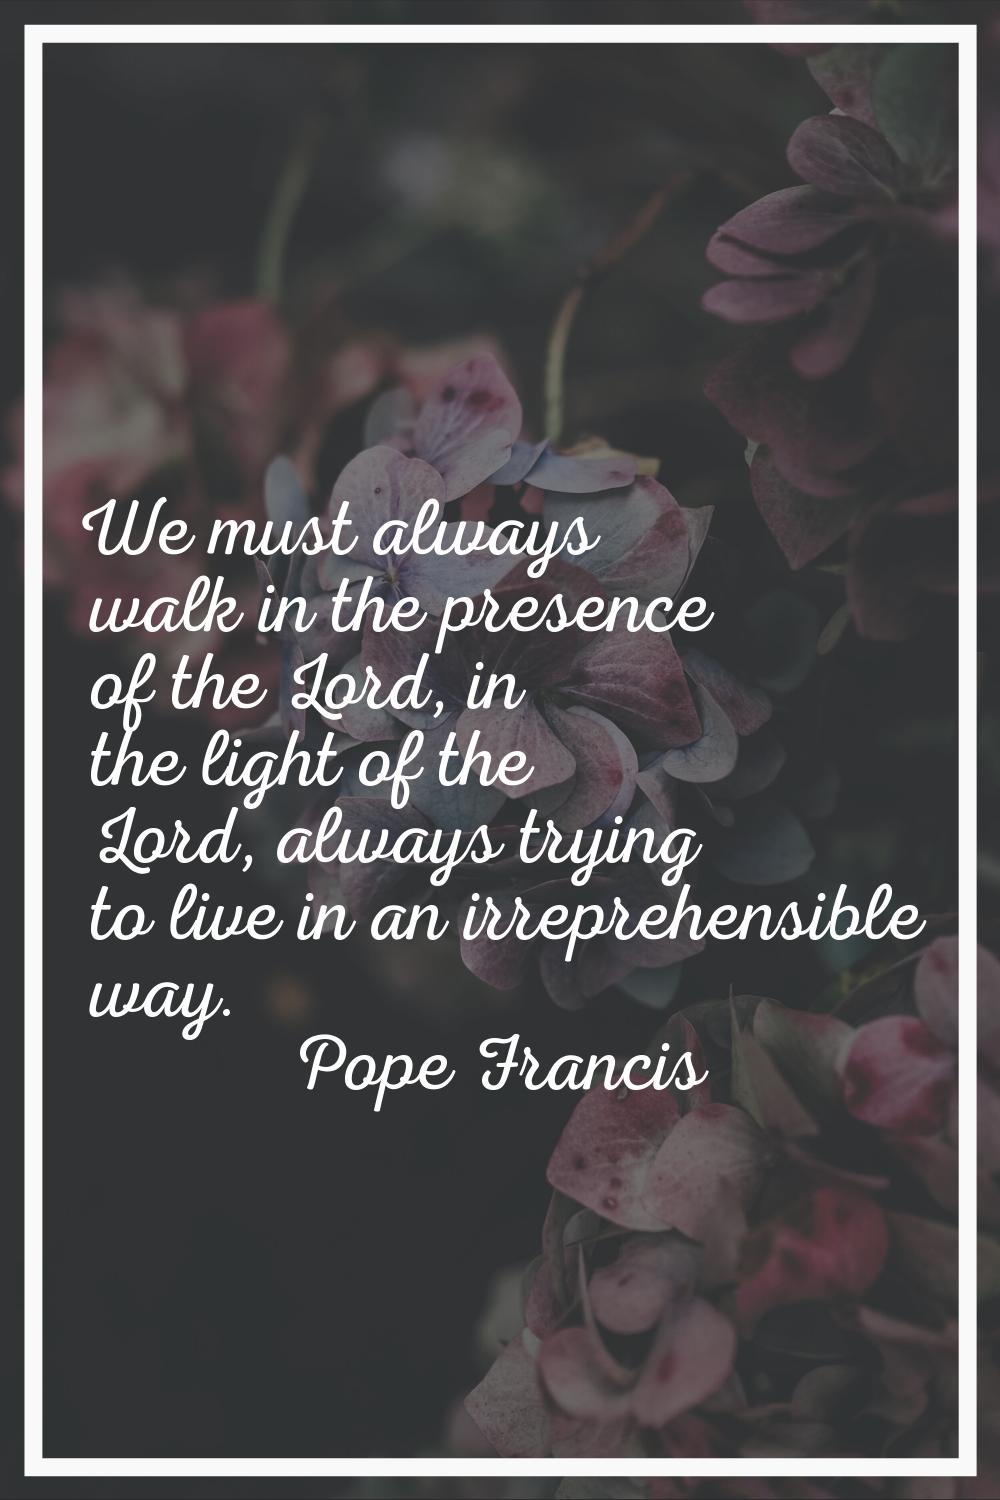 We must always walk in the presence of the Lord, in the light of the Lord, always trying to live in